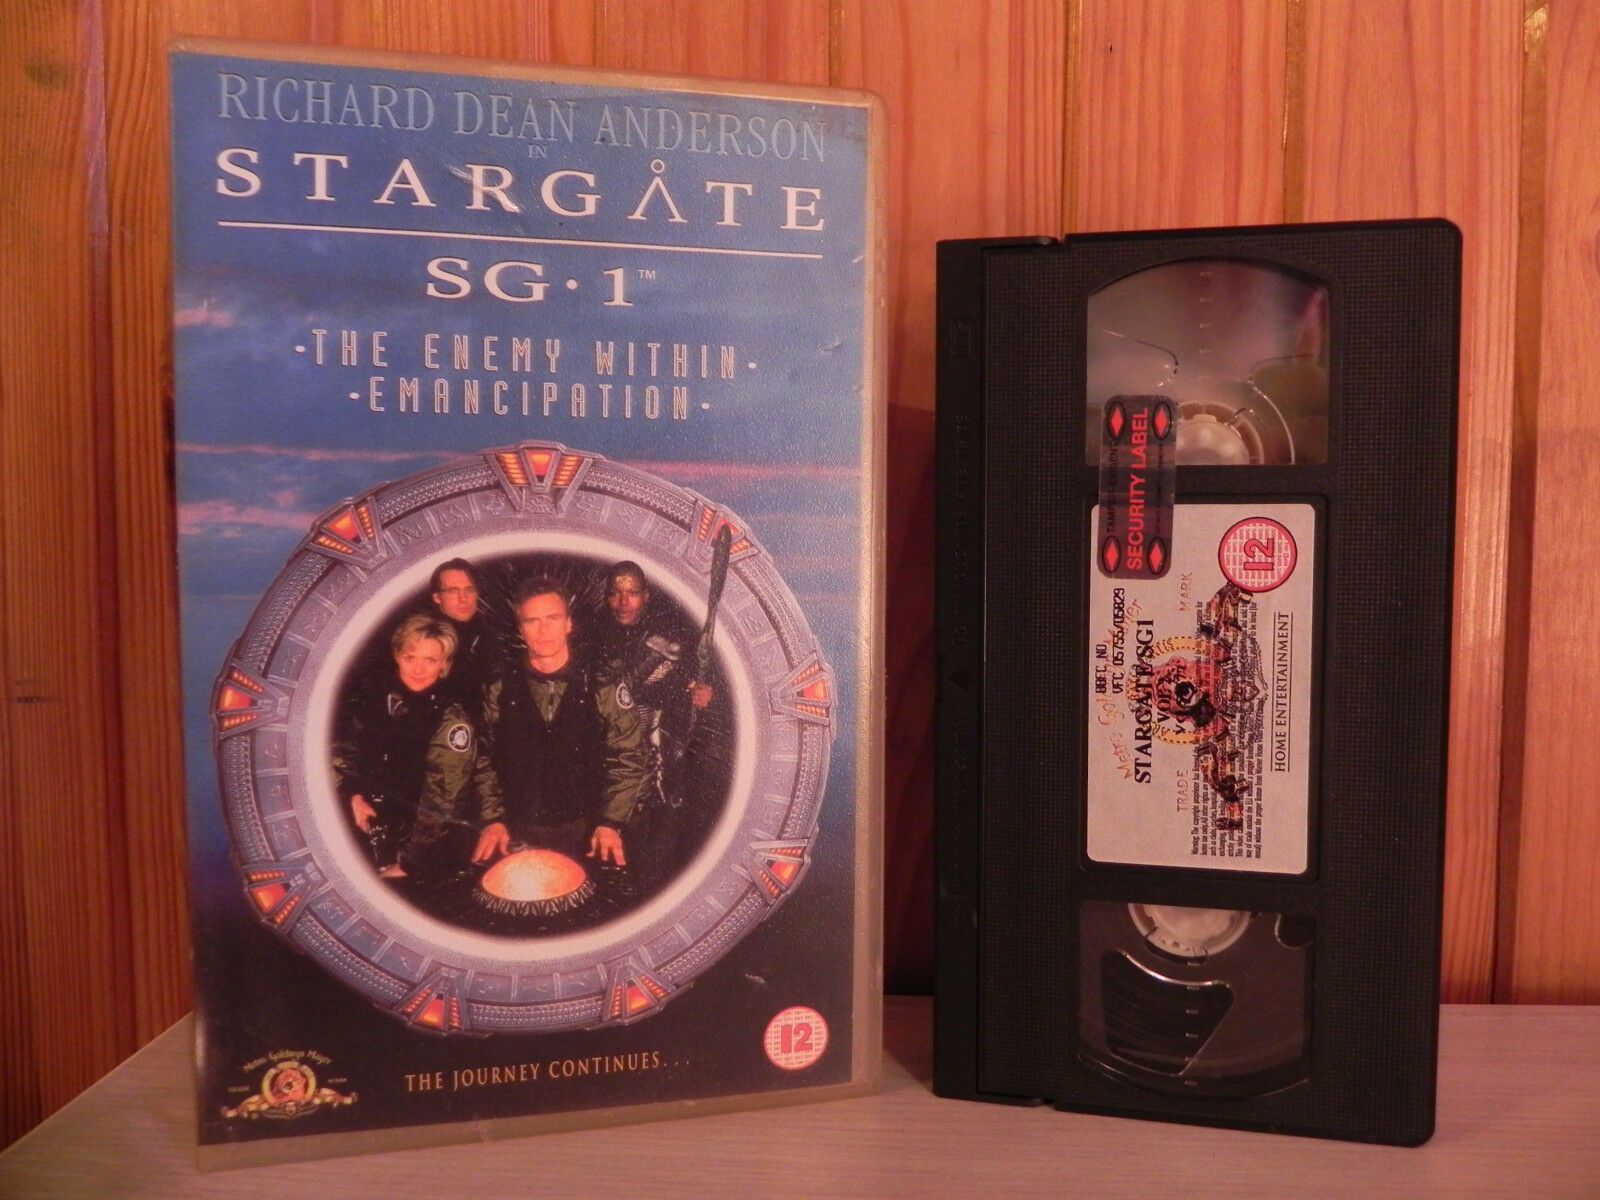 STARGATE SG-1 - Original Release - The Enemy Within - Big Box Video - 067677 VHS-